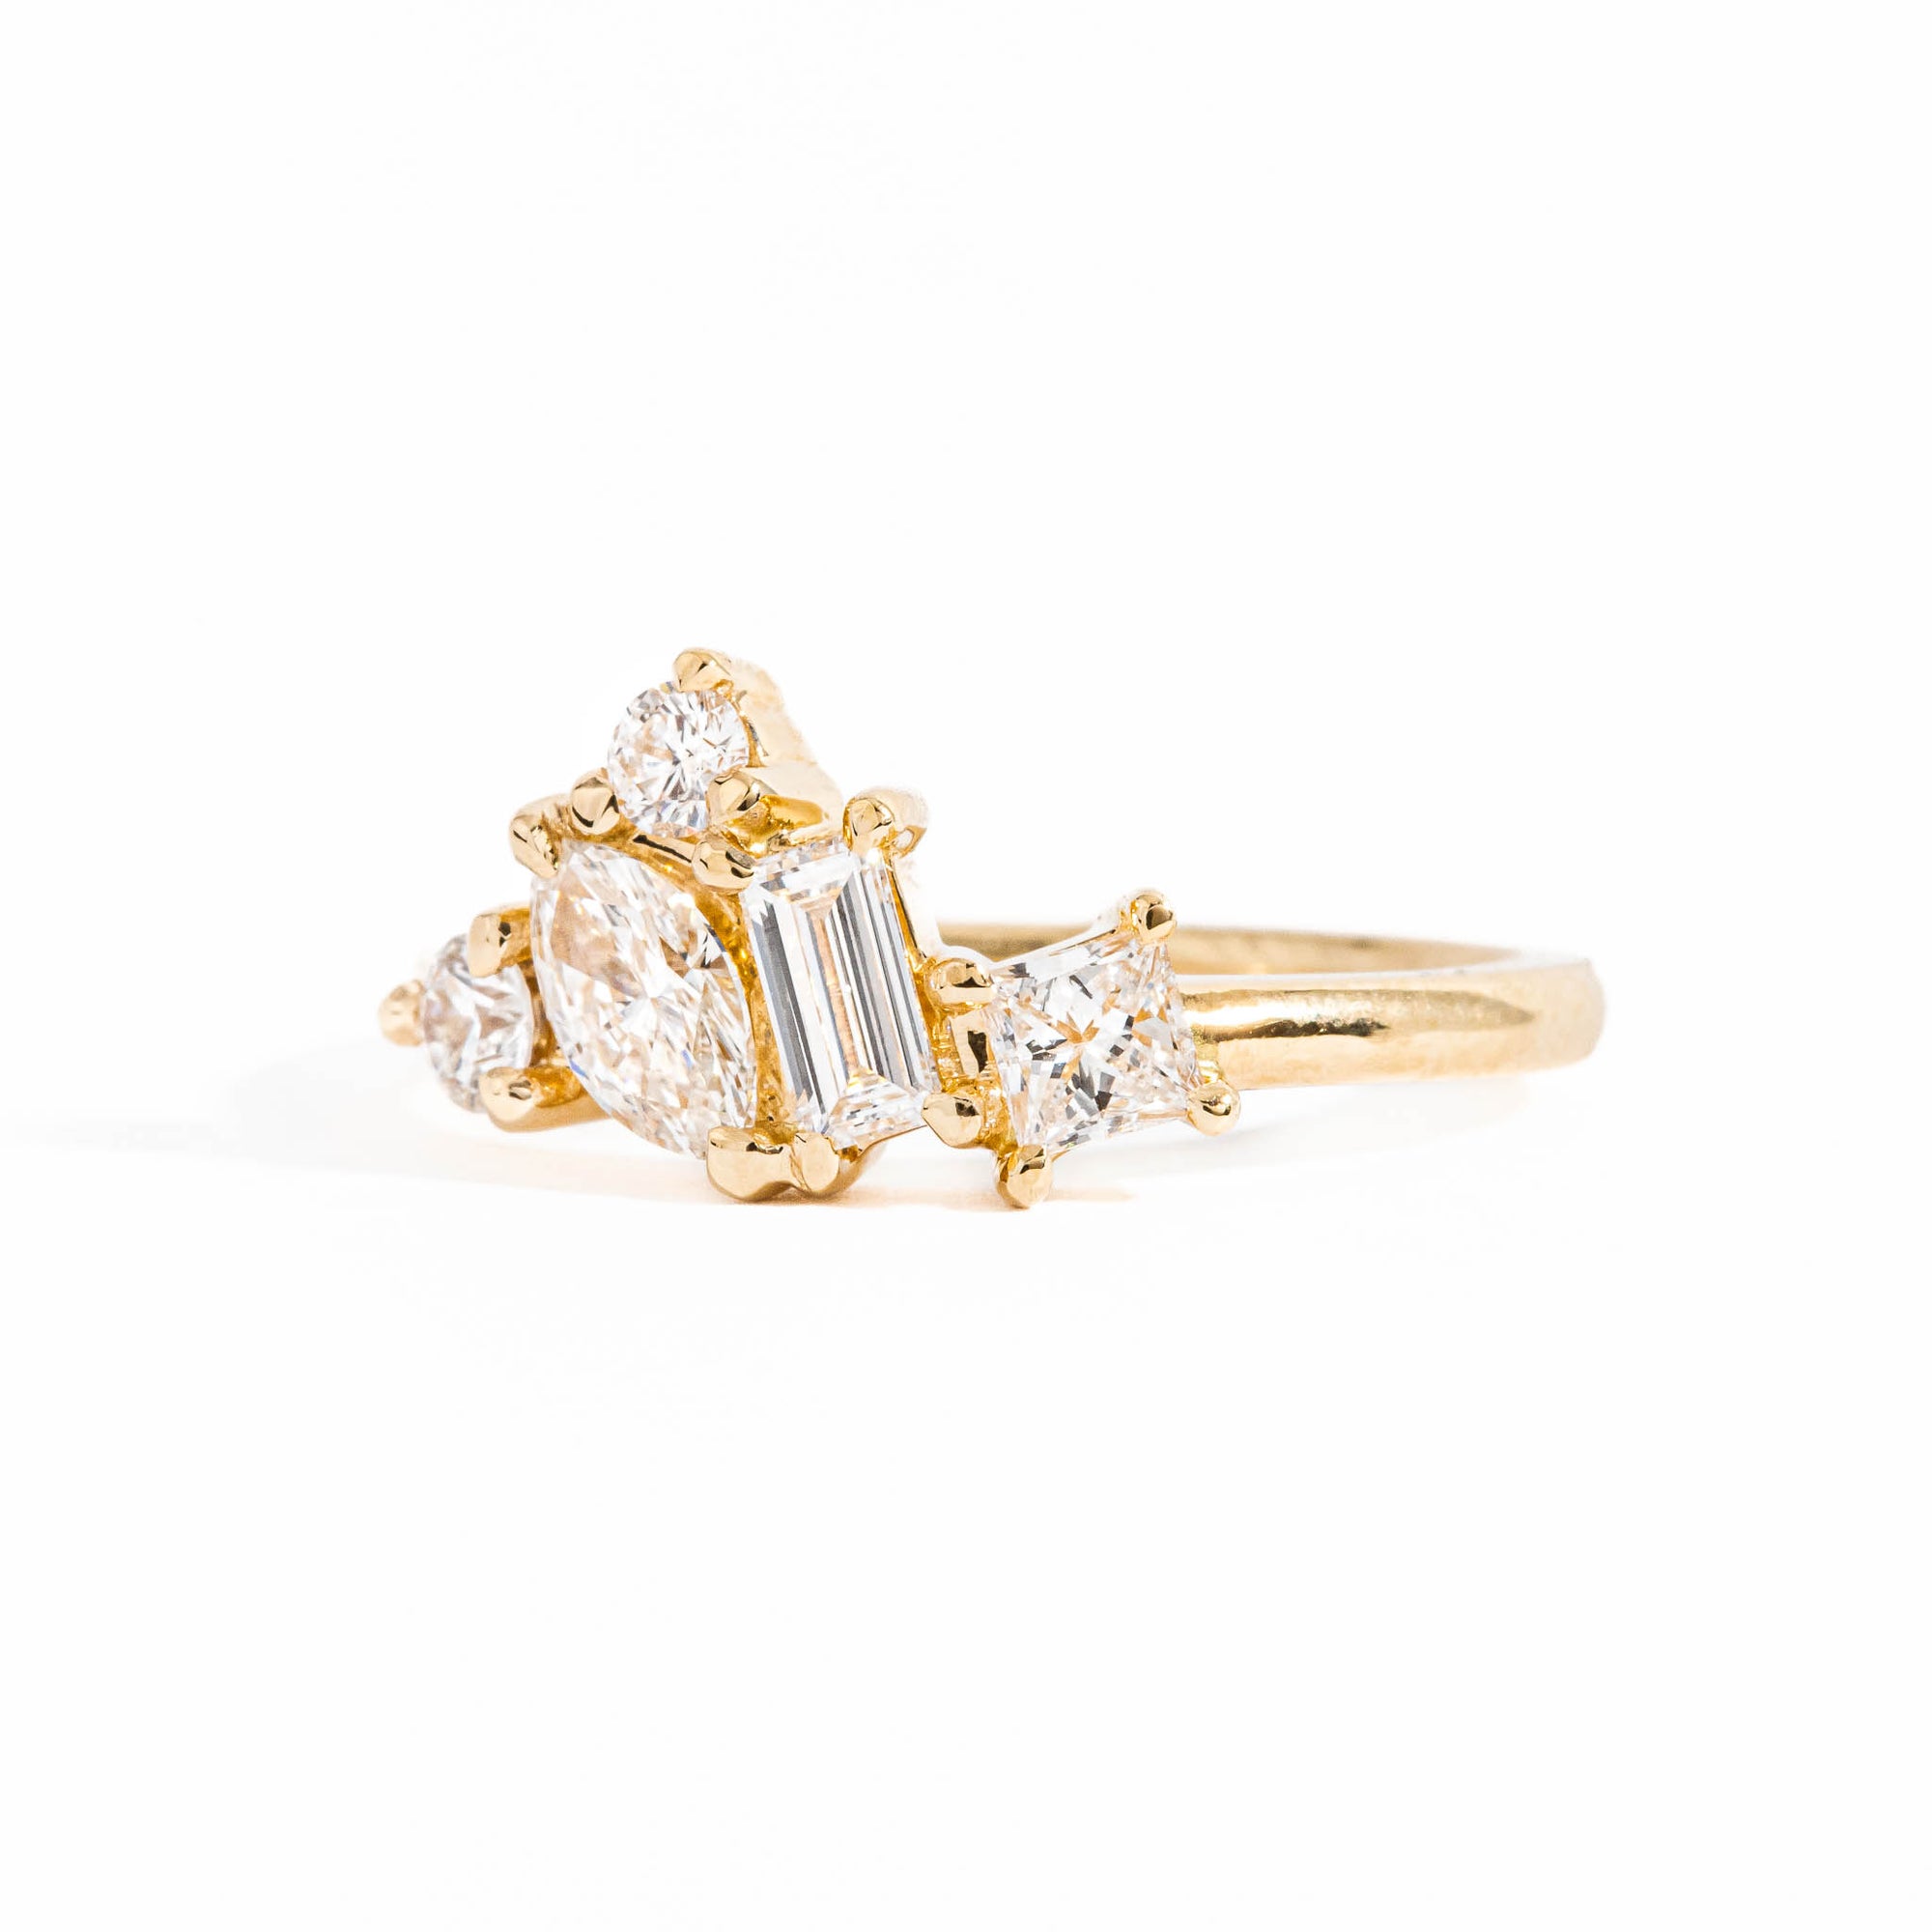 Five Stone Pear Cut, Baguette Cut and Princess Cut White Diamond Engagement Ring in 18 Carat Yellow Gold